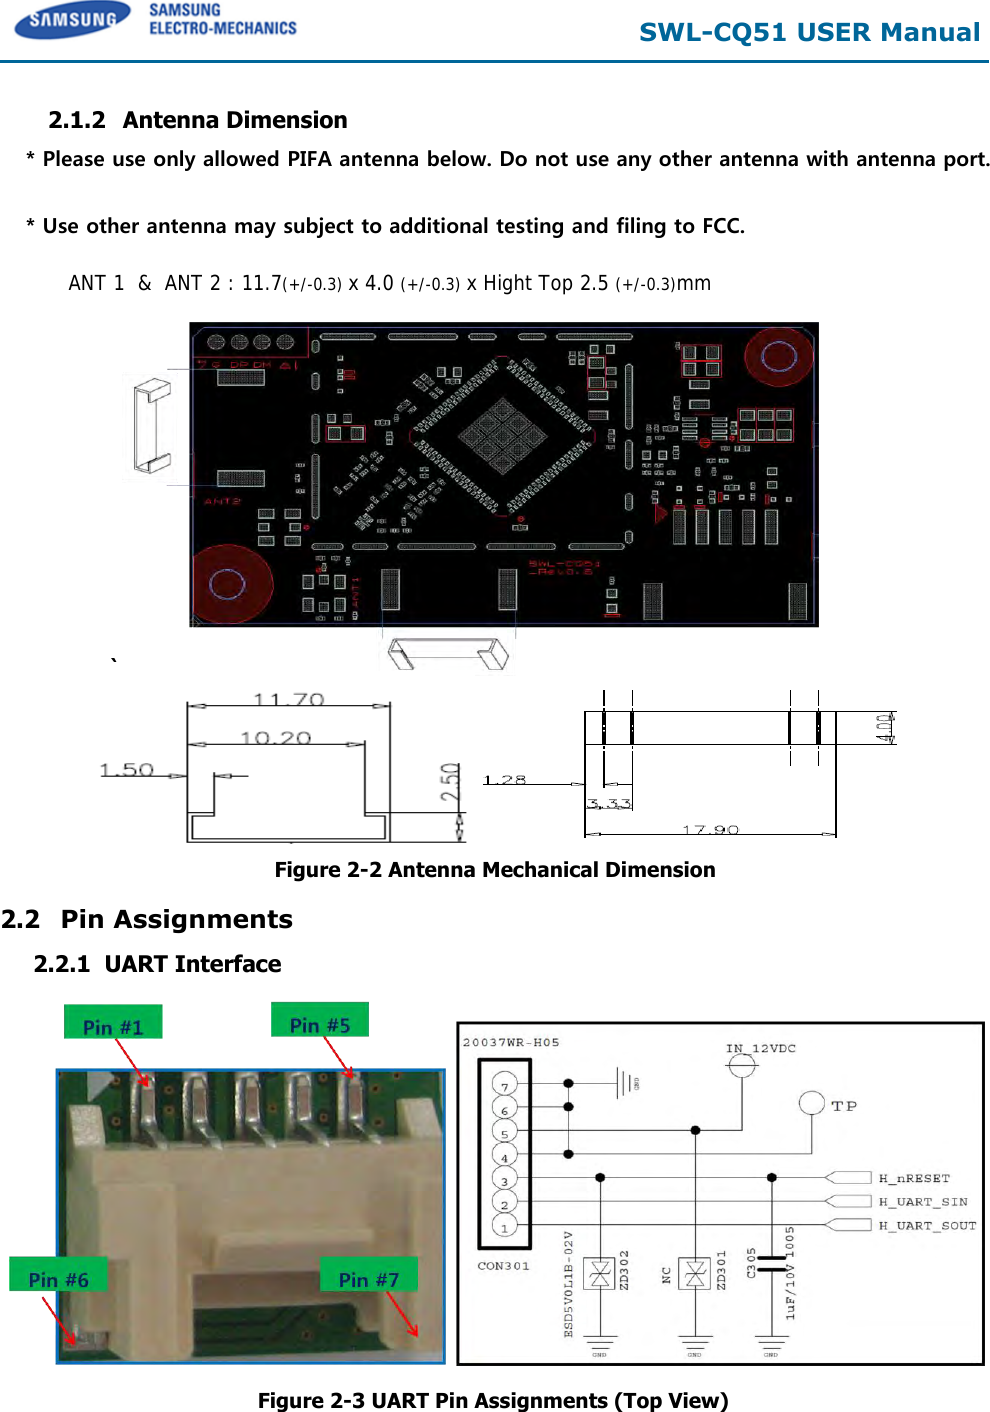  SWL-CQ51 USER Manual  2.1.2 Antenna Dimension ANT 1  &amp;  ANT 2 : 11.7(+/-0.3) x 4.0 (+/-0.3) x Hight Top 2.5 (+/-0.3)mm  `      Figure 2-2 Antenna Mechanical Dimension  2.2 Pin Assignments      2.2.1  UART Interface  Figure 2-3 UART Pin Assignments (Top View) * Please use only allowed PIFA antenna below. Do not use any other antenna with antenna port. * Use other antenna may subject to additional testing and filing to FCC. 